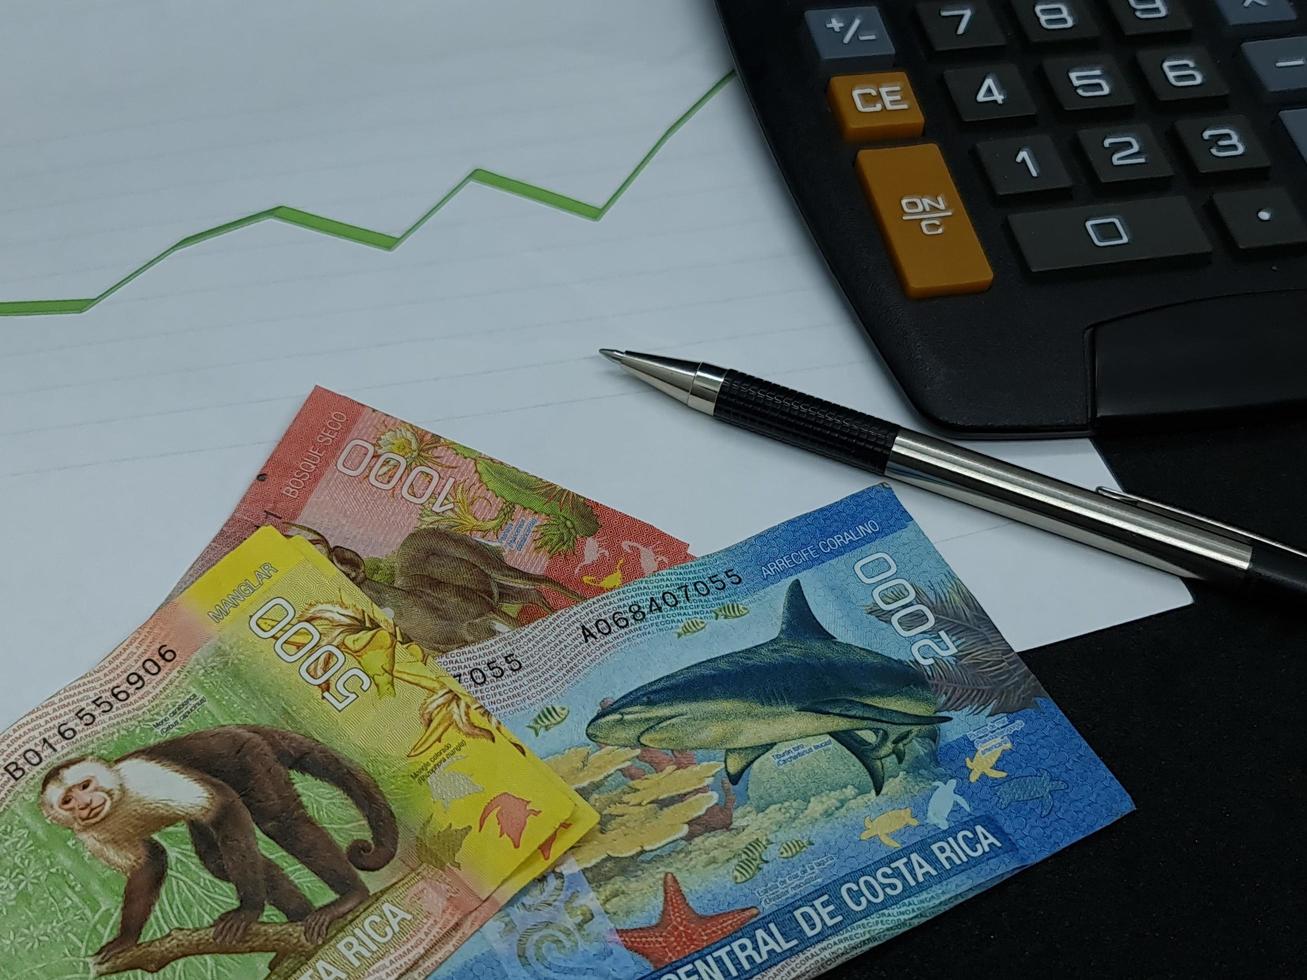 Costa Rica banknotes, pen and calculator on background with rising trend green line photo